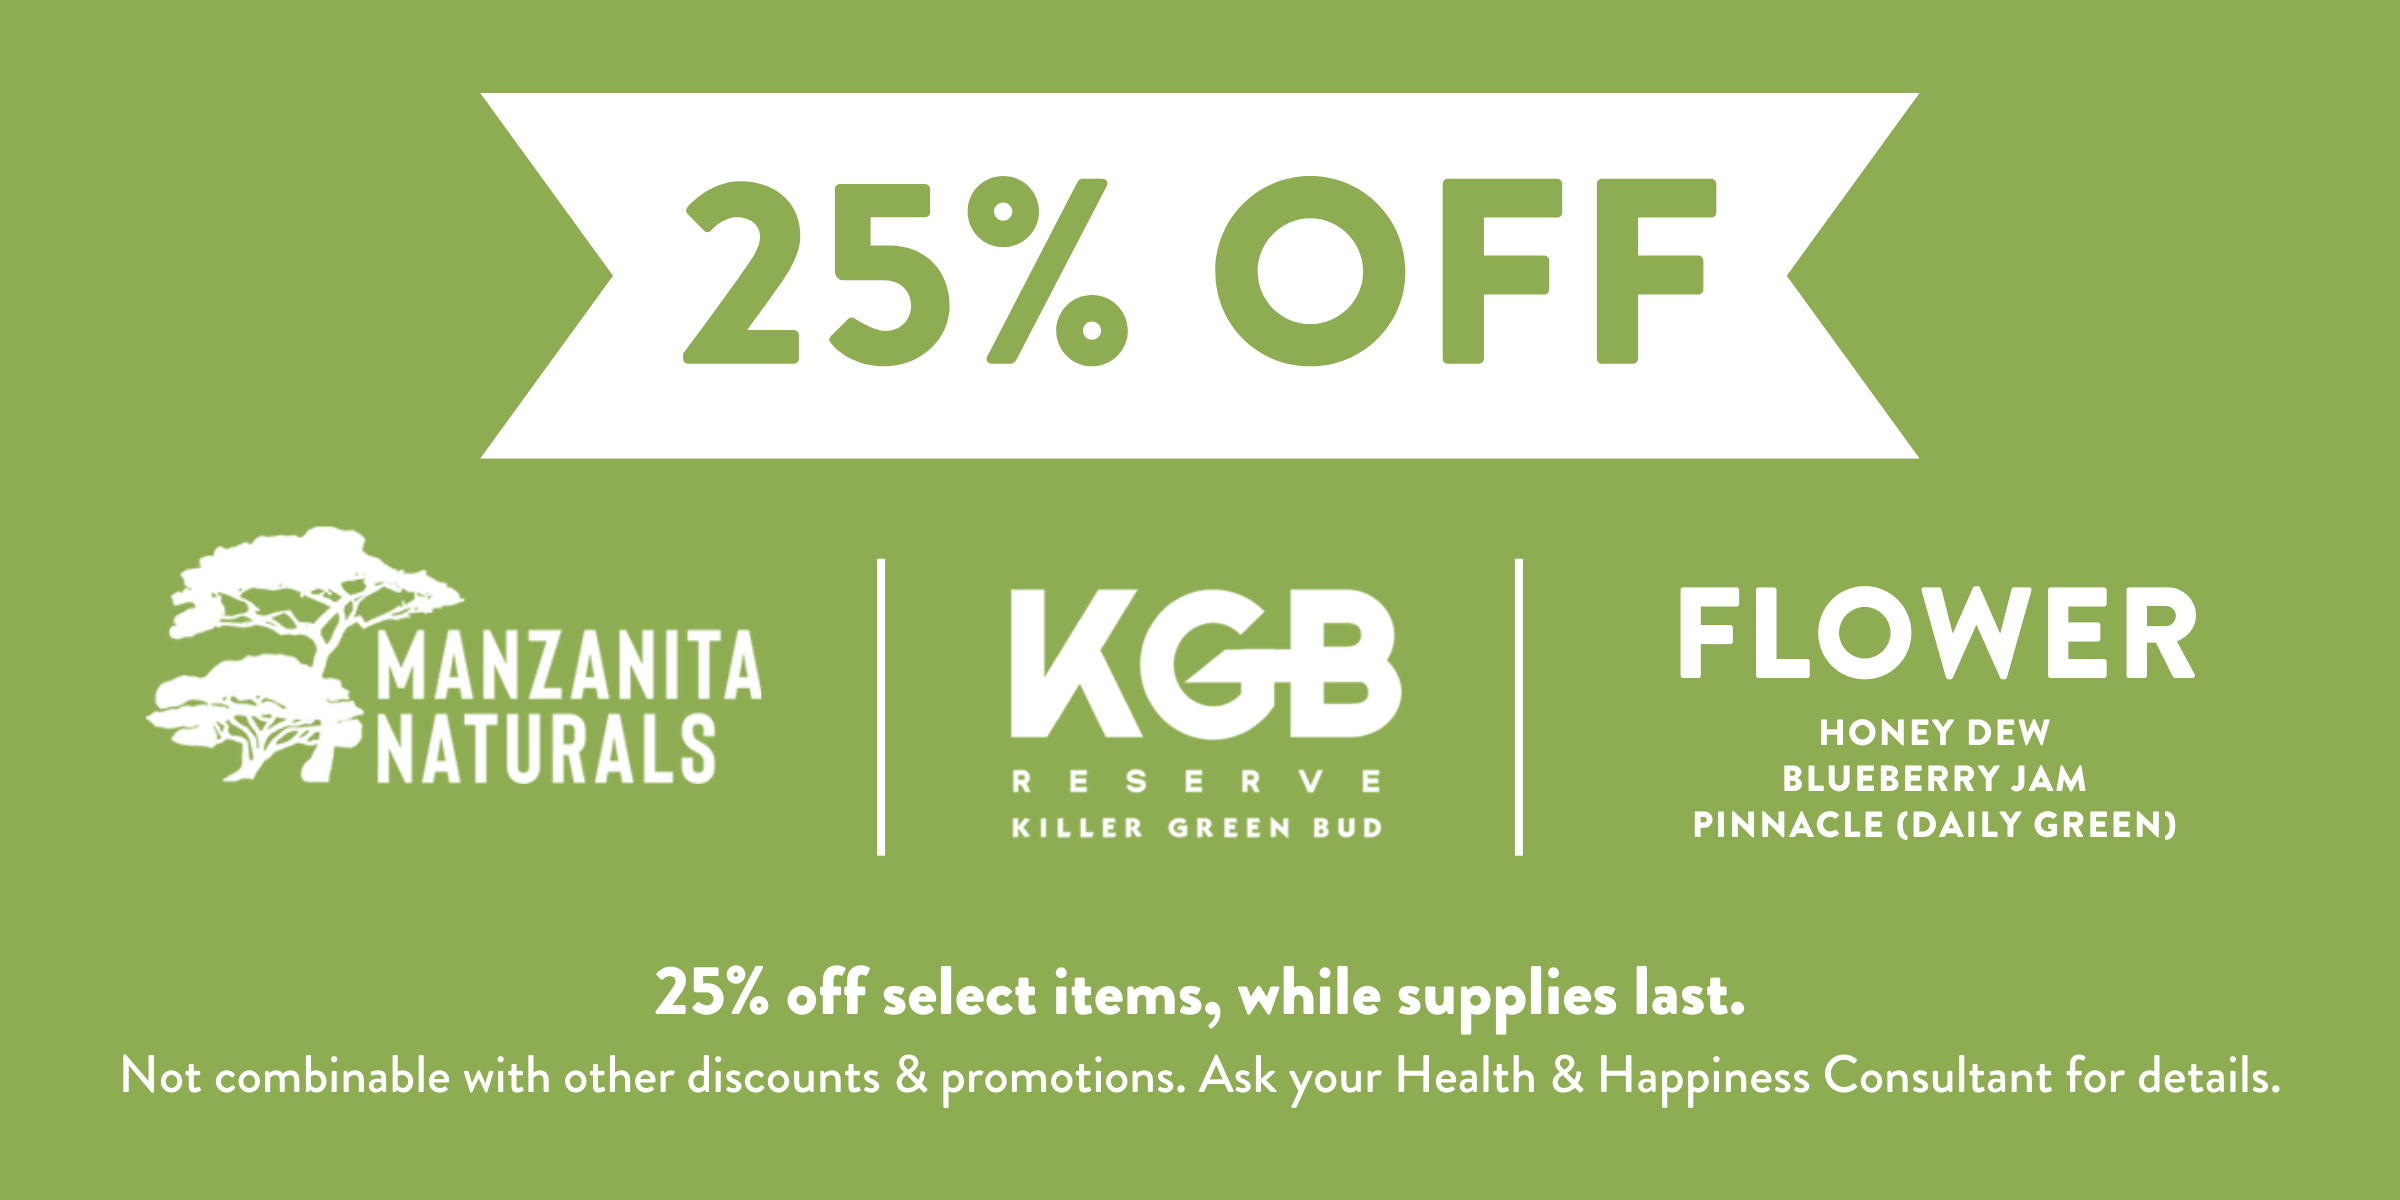 25% off Manzanita Naturals, KGB Reserve, and select Solful flower. 25% off select items while supplies last. Not combinable with other discounts and promotions. Ask your Health and Happiness consultant for details.